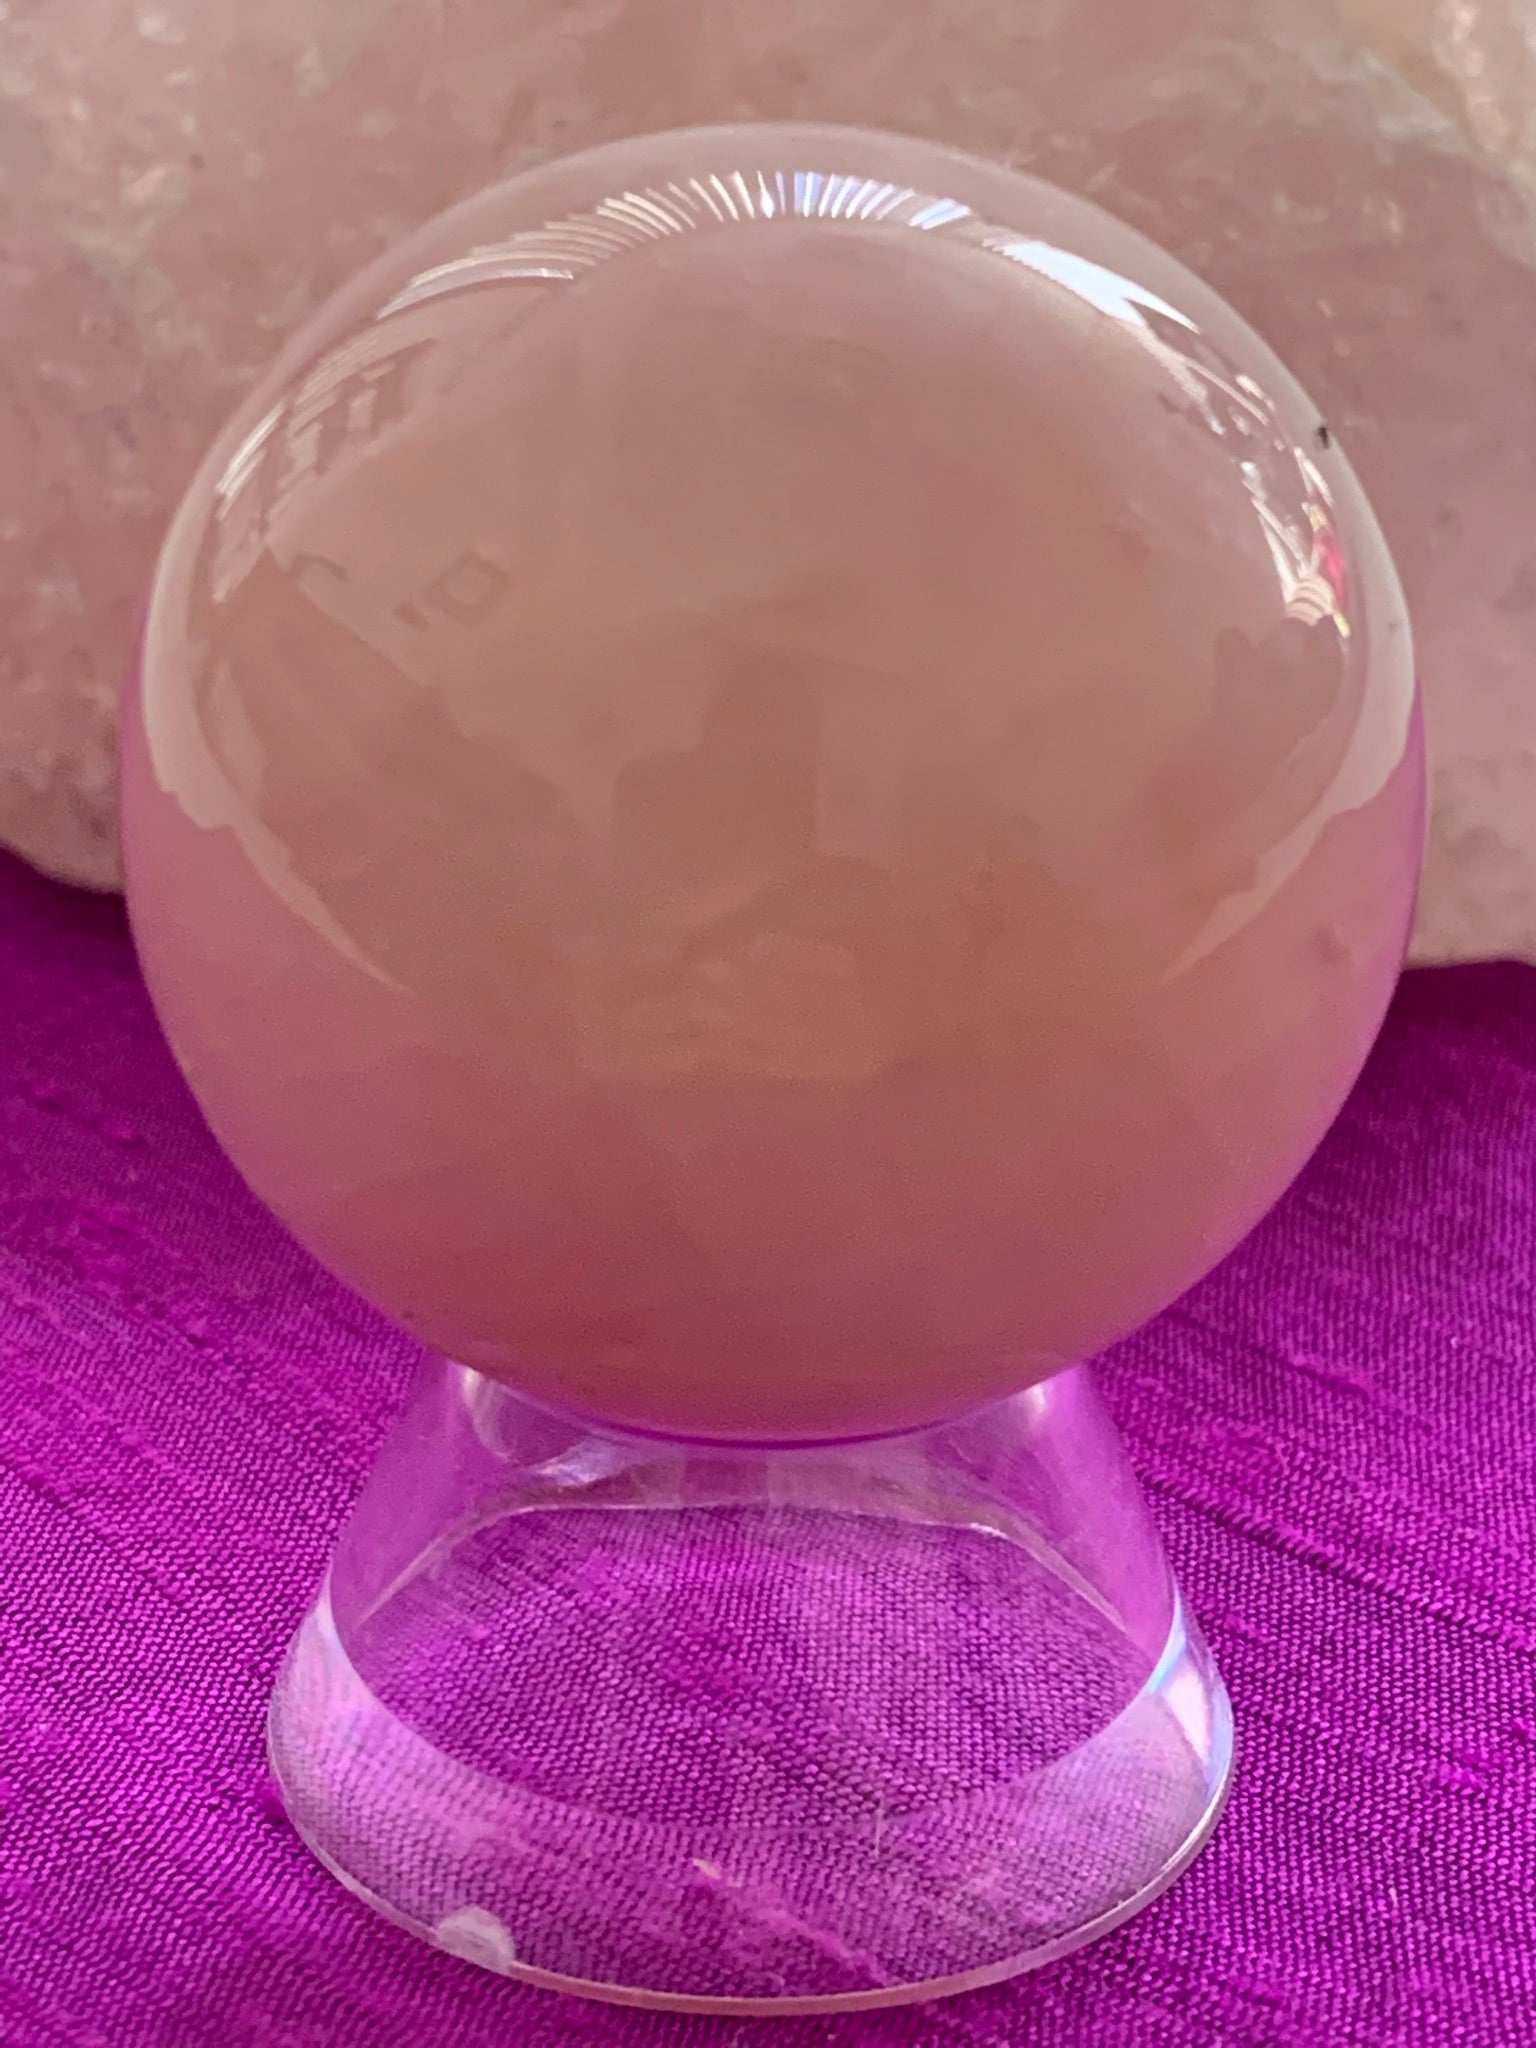 Close-up view with stand. High quality Rose Quartz sphere is perfect for your altar, meditation space or to hold while meditating, or anywhere you want to radiate the energy of love ♥. Rose quartz is the "stone of unconditional love & infinite peace." It opens the heart and soothes emotional distress. Size is approximately 2"/40mm. Plastic stand as seen in photo, is included with your purchase.